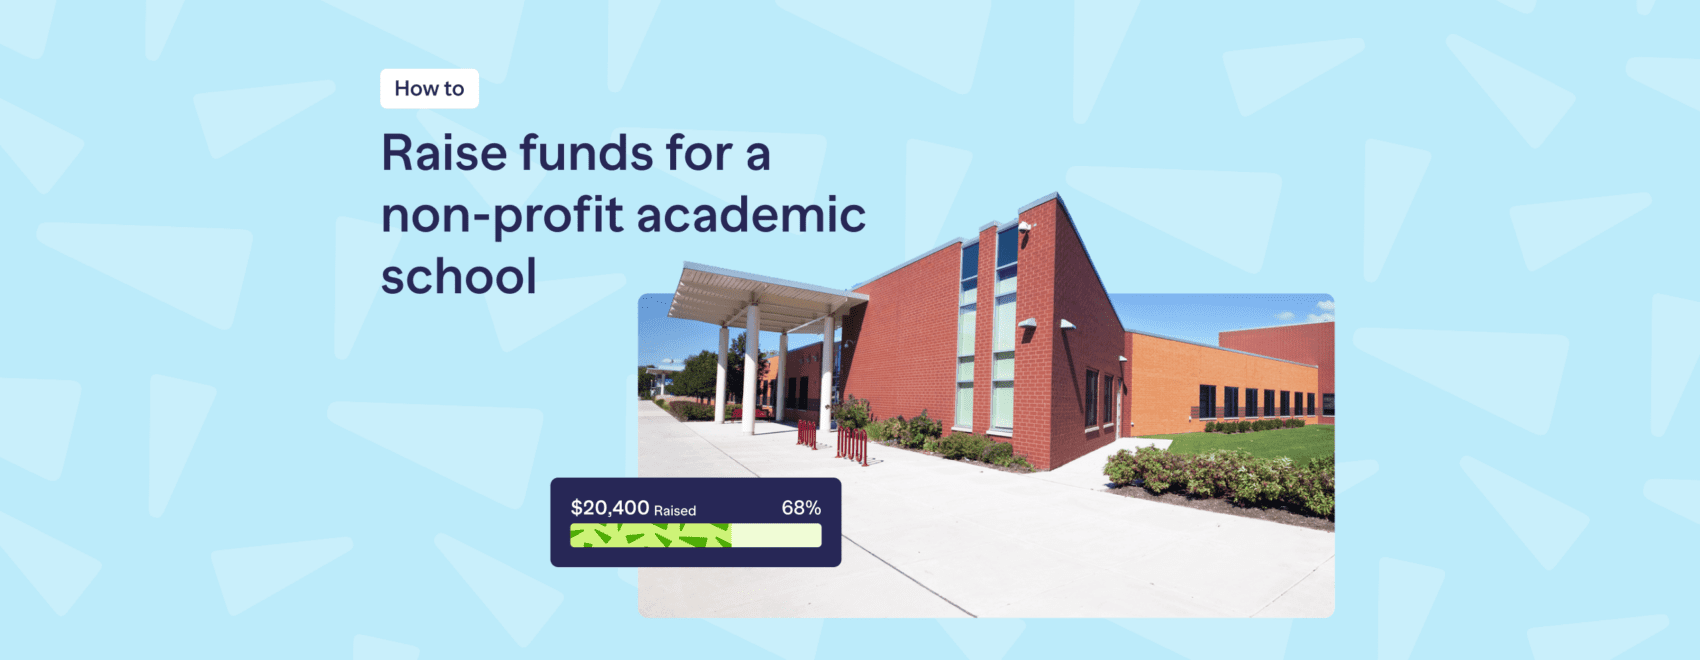 How to raise funds for a non profit academic school